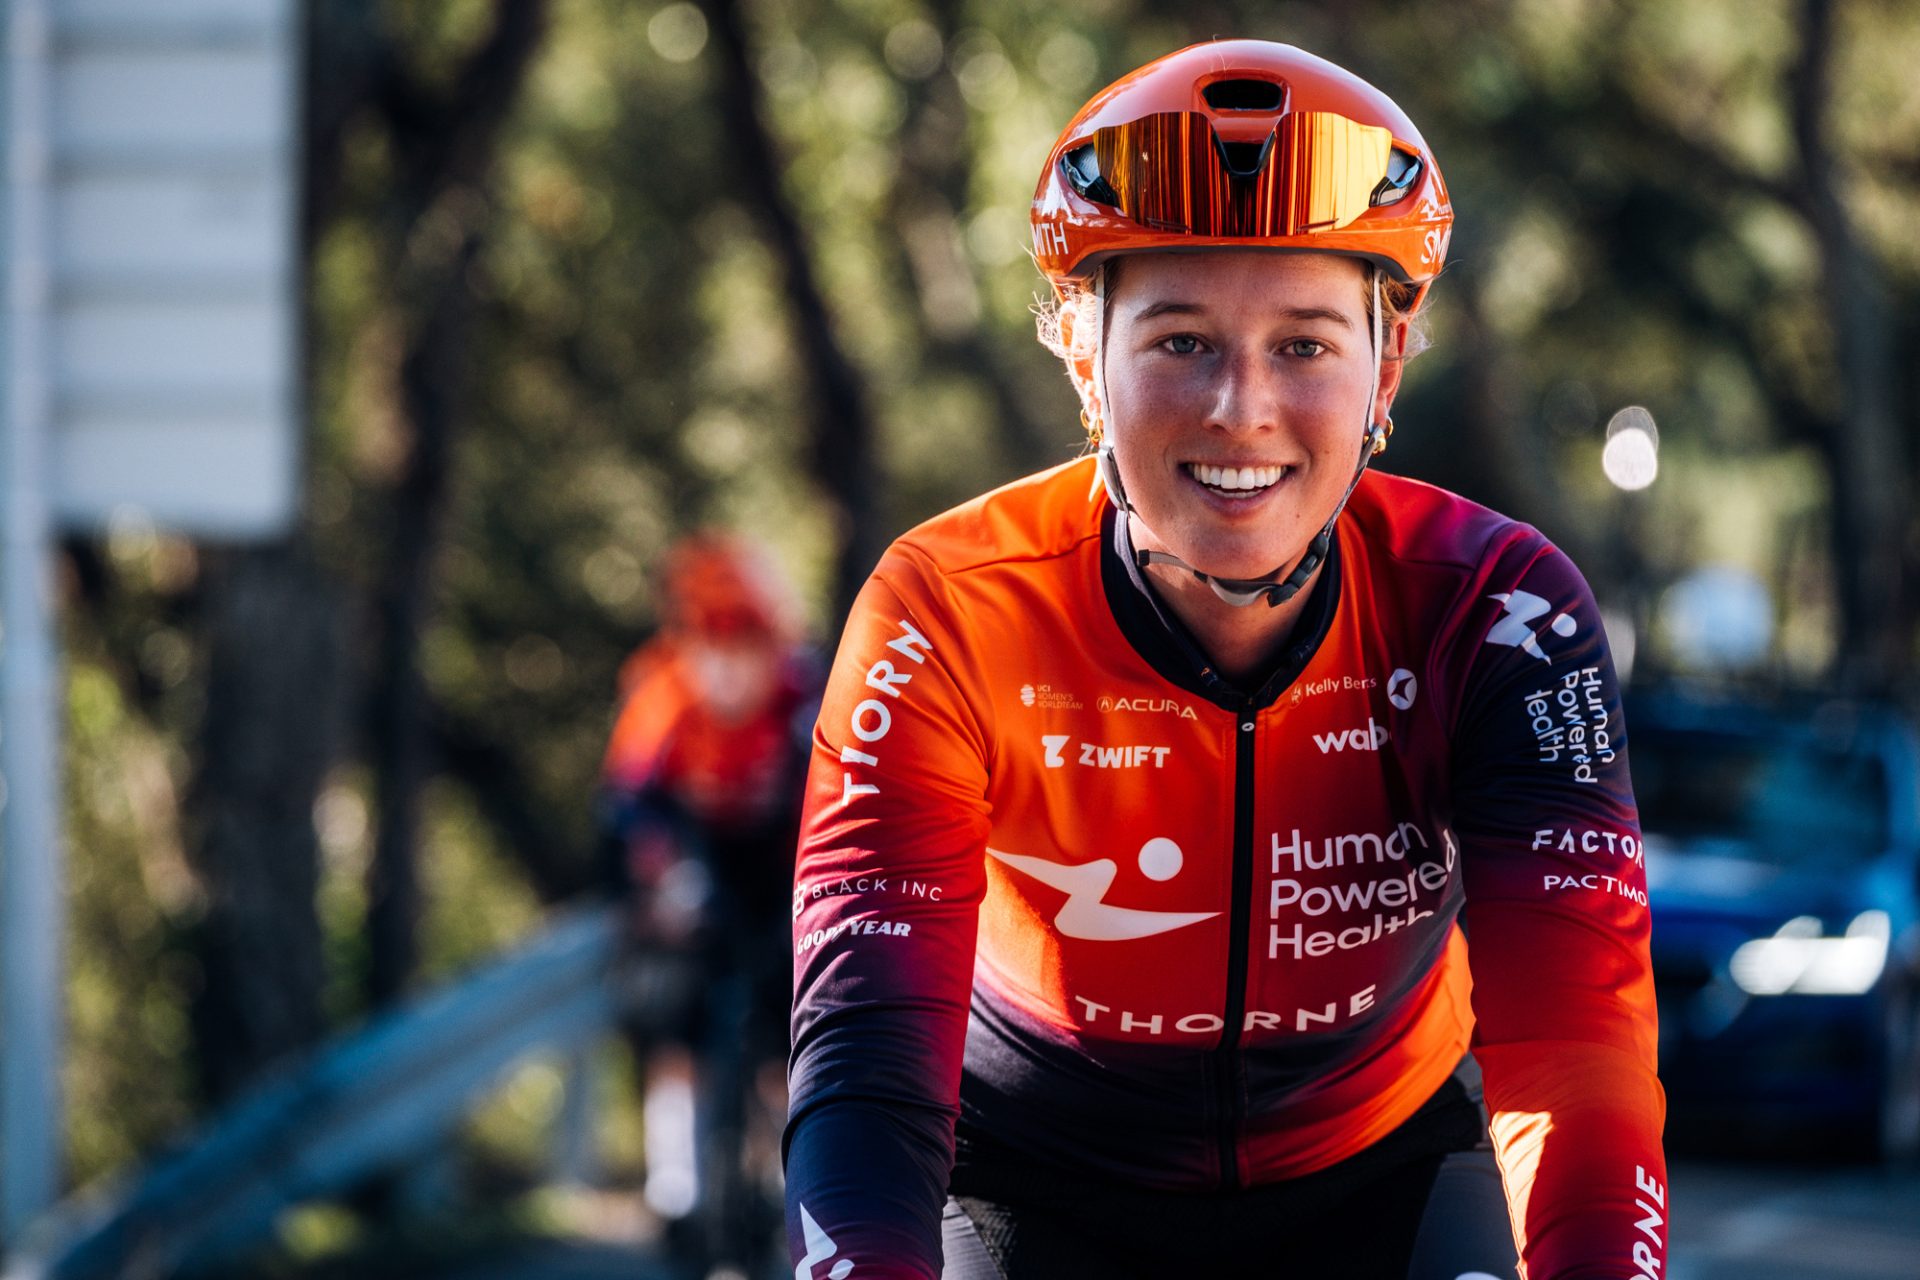 Alice Barnes smiles at the camera while riding up a climb in Spain. The HPH kit is purple to orange fade, with alternating colors on each shoulder and an orange body with a purple trim at sleeves and lower right hem. The purple describes a kind of diagonal theme across from left shoulder to right hip.